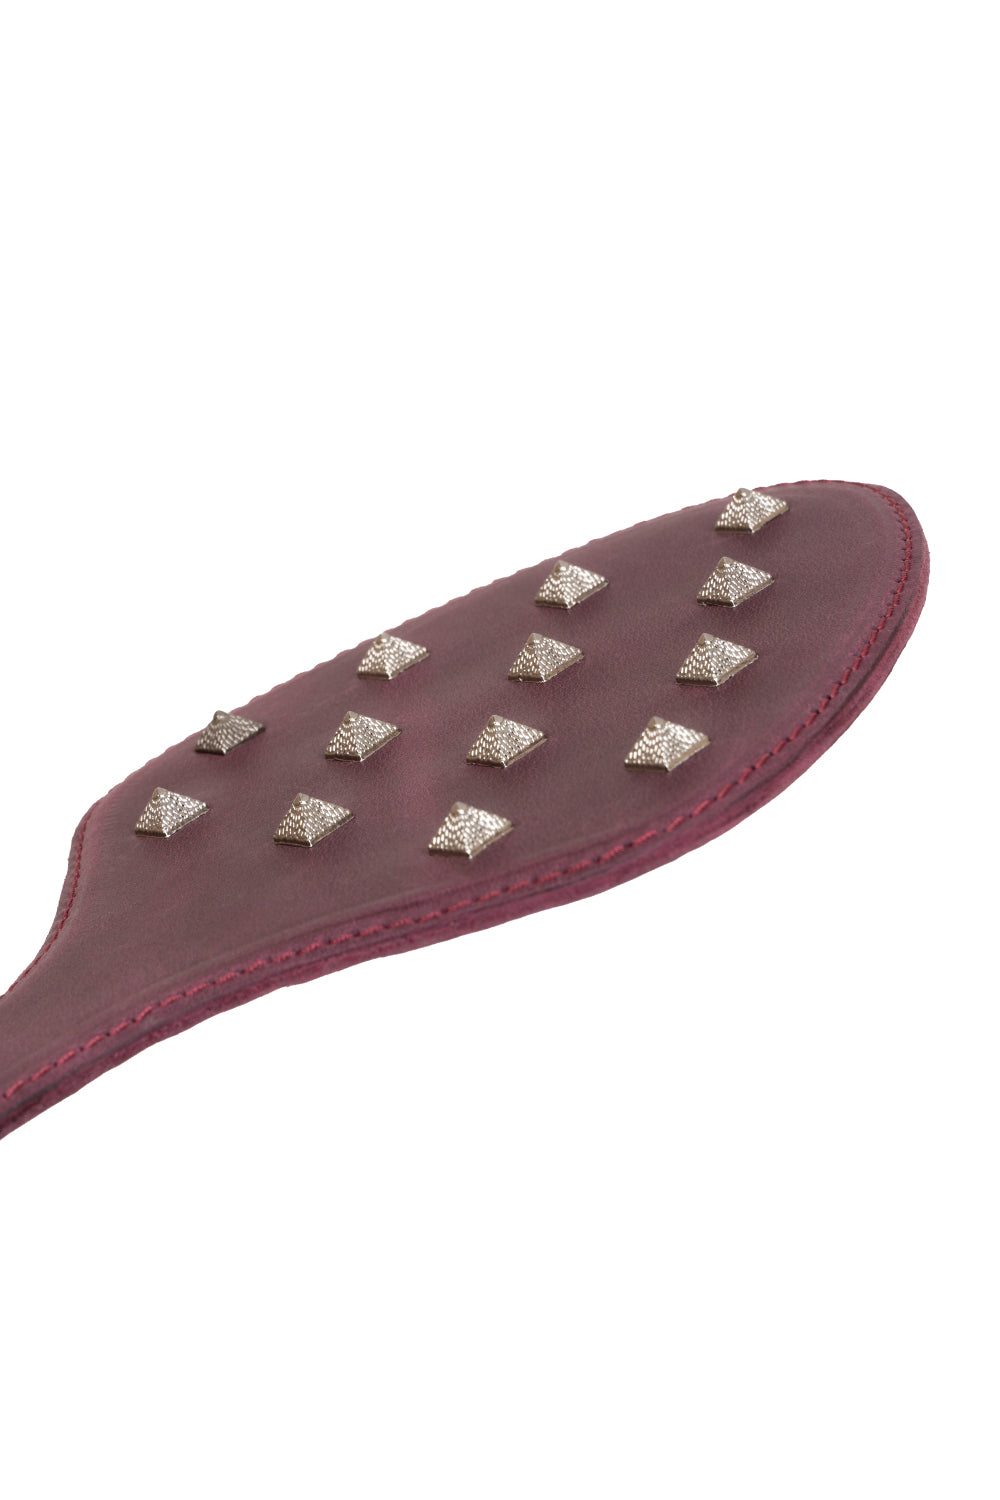 CRAZY HORSE Leather Spanking Paddle with Spikes